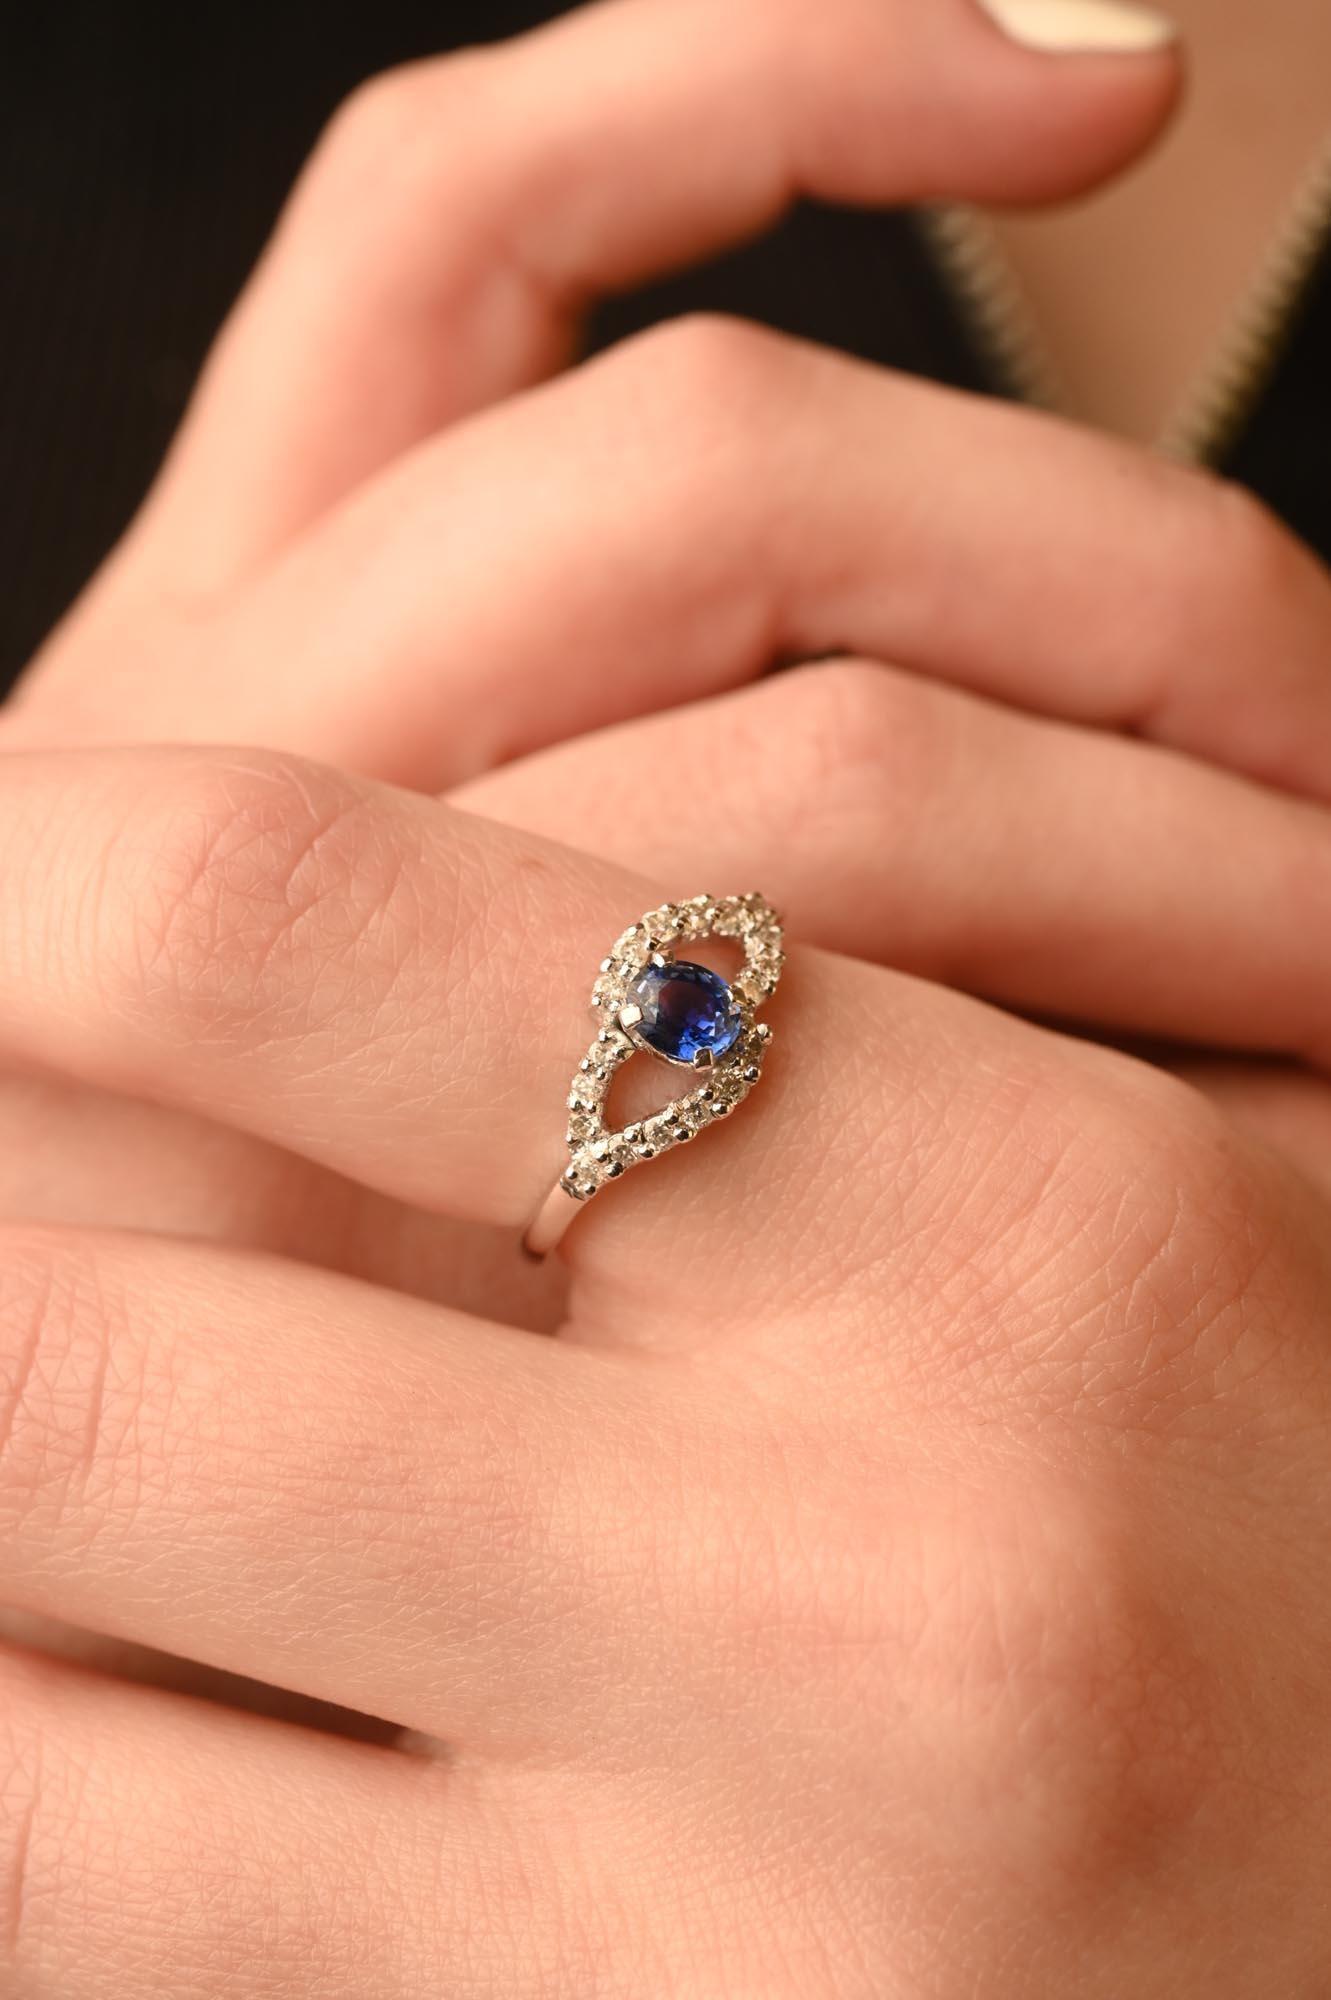 For Sale:  Alluring Blue Sapphire Ring with Diamonds Set in 14K Solid White Gold 8